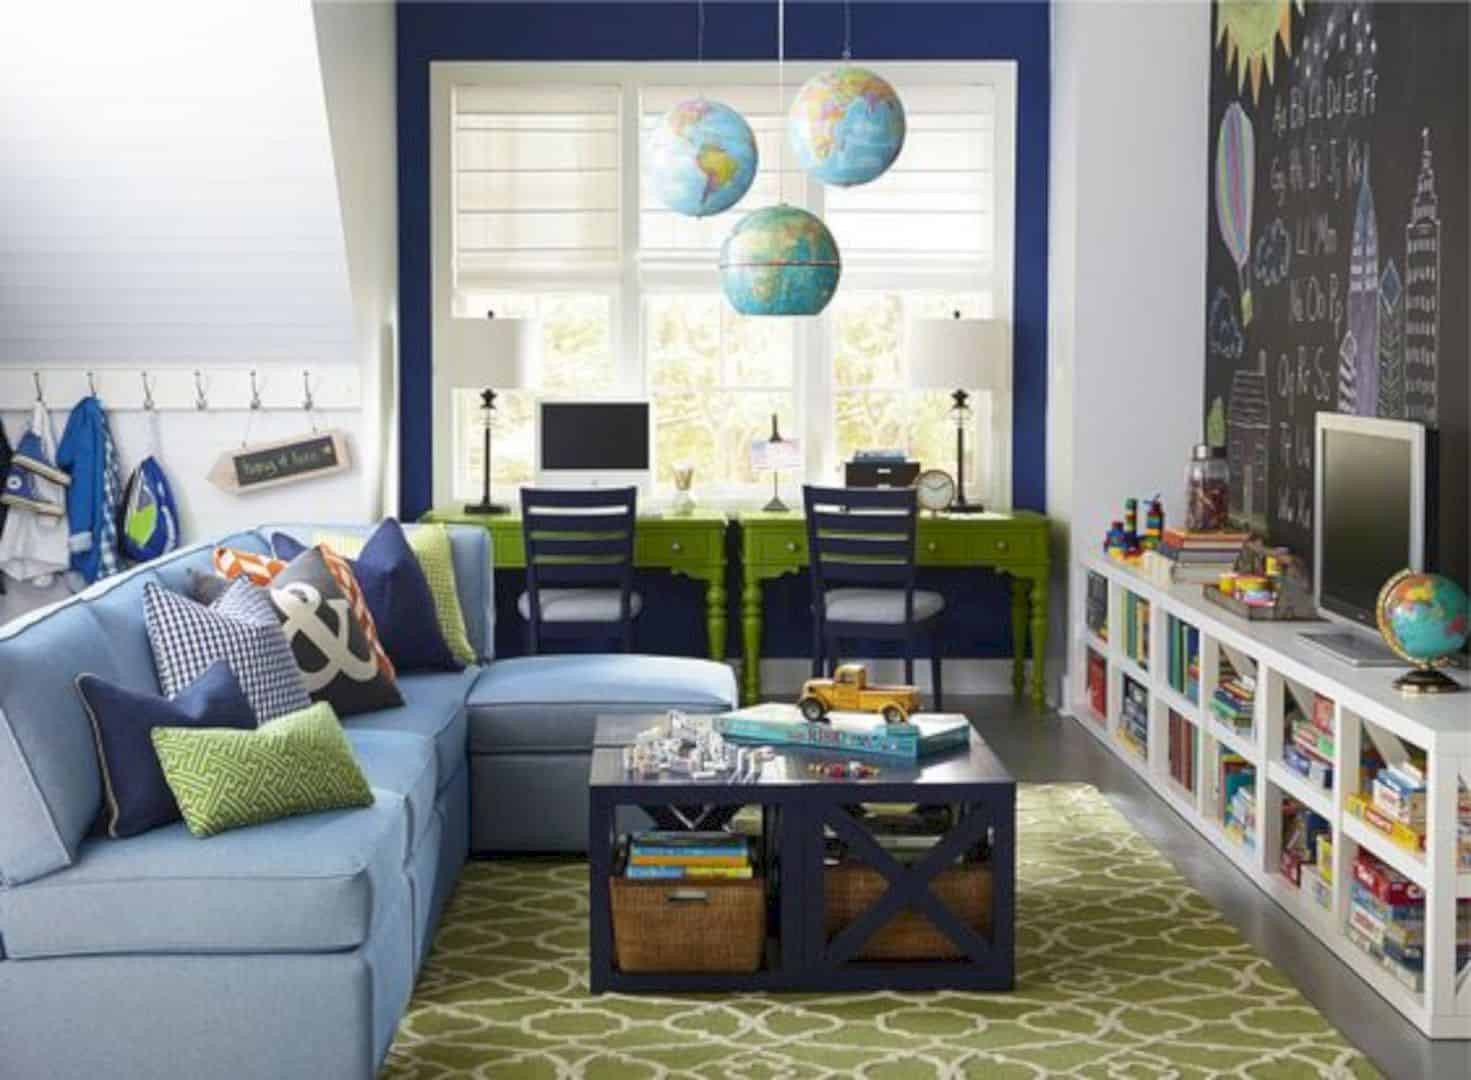 Small Tv For Kids Room
 16 Furniture Ideas to Warm Up Your Family Room